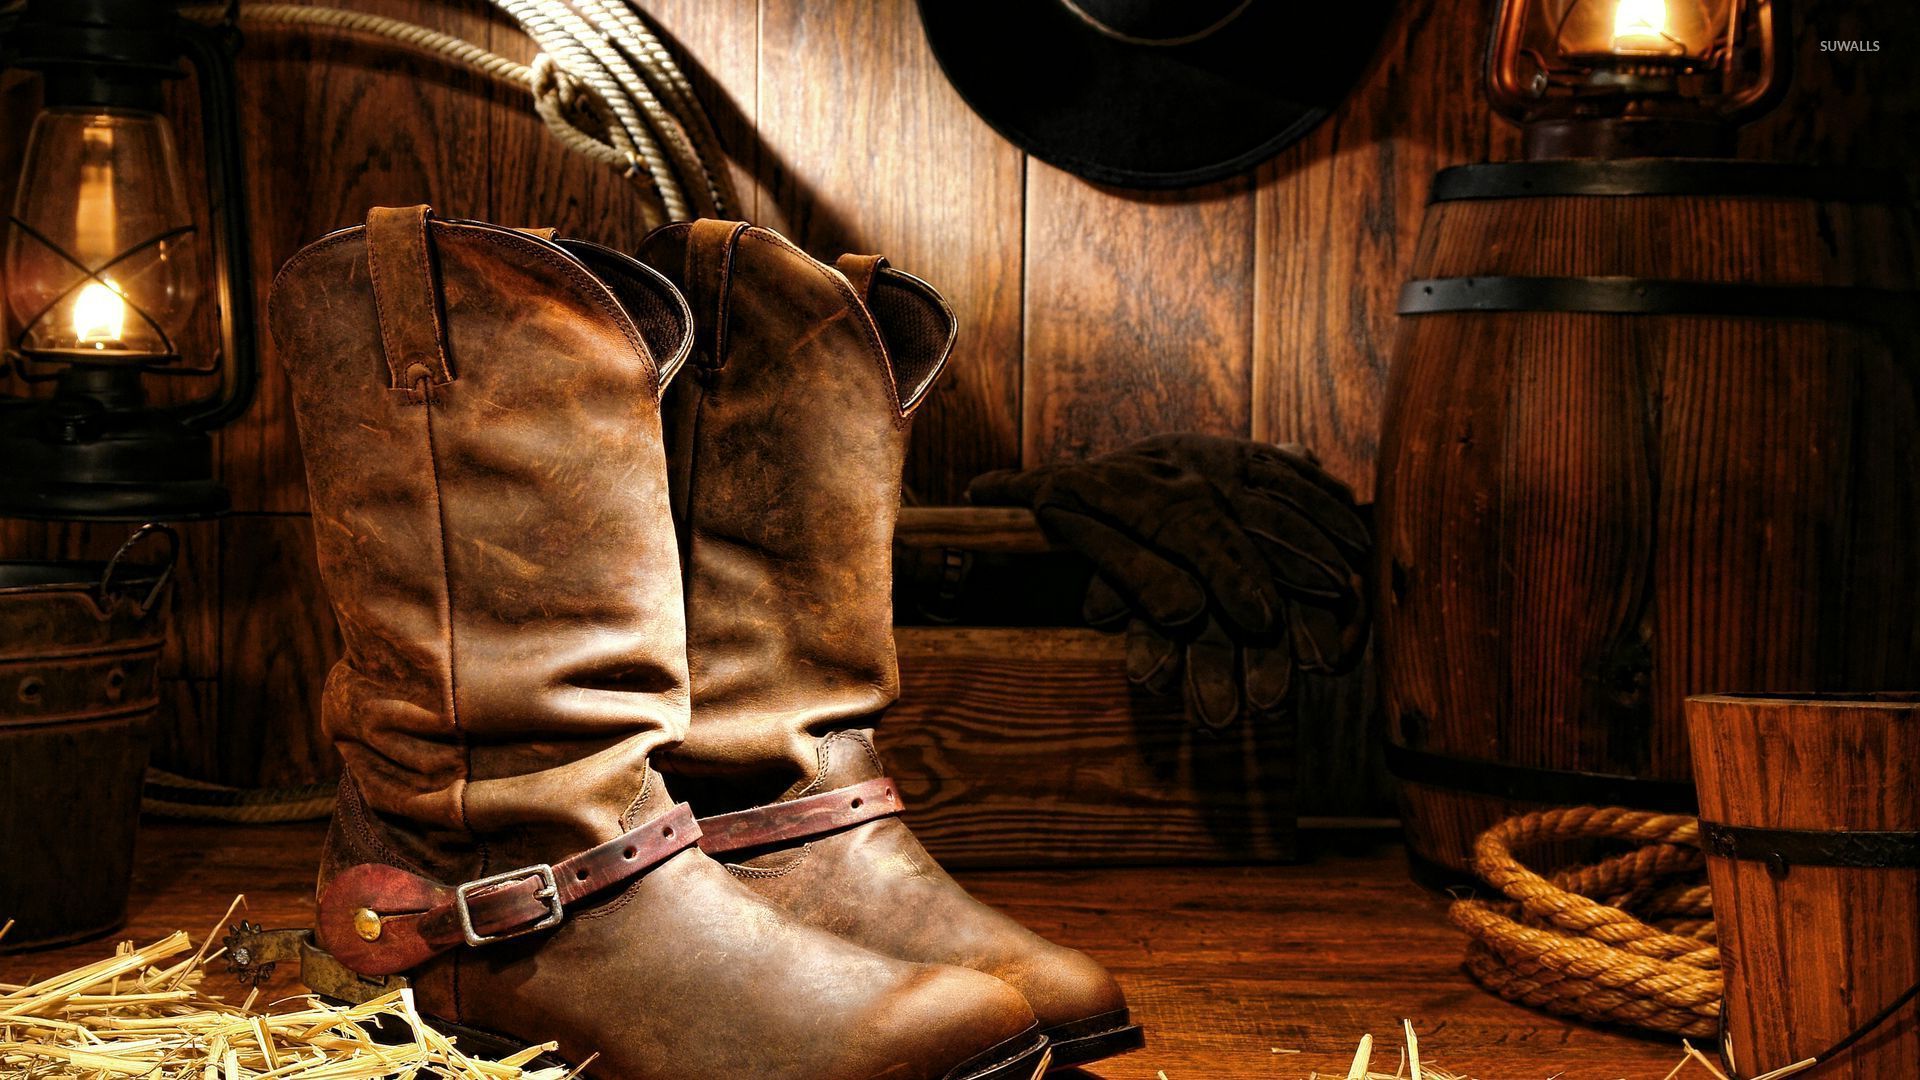 Cowboy boots wallpaper   Photography wallpapers   27184 1680x1050